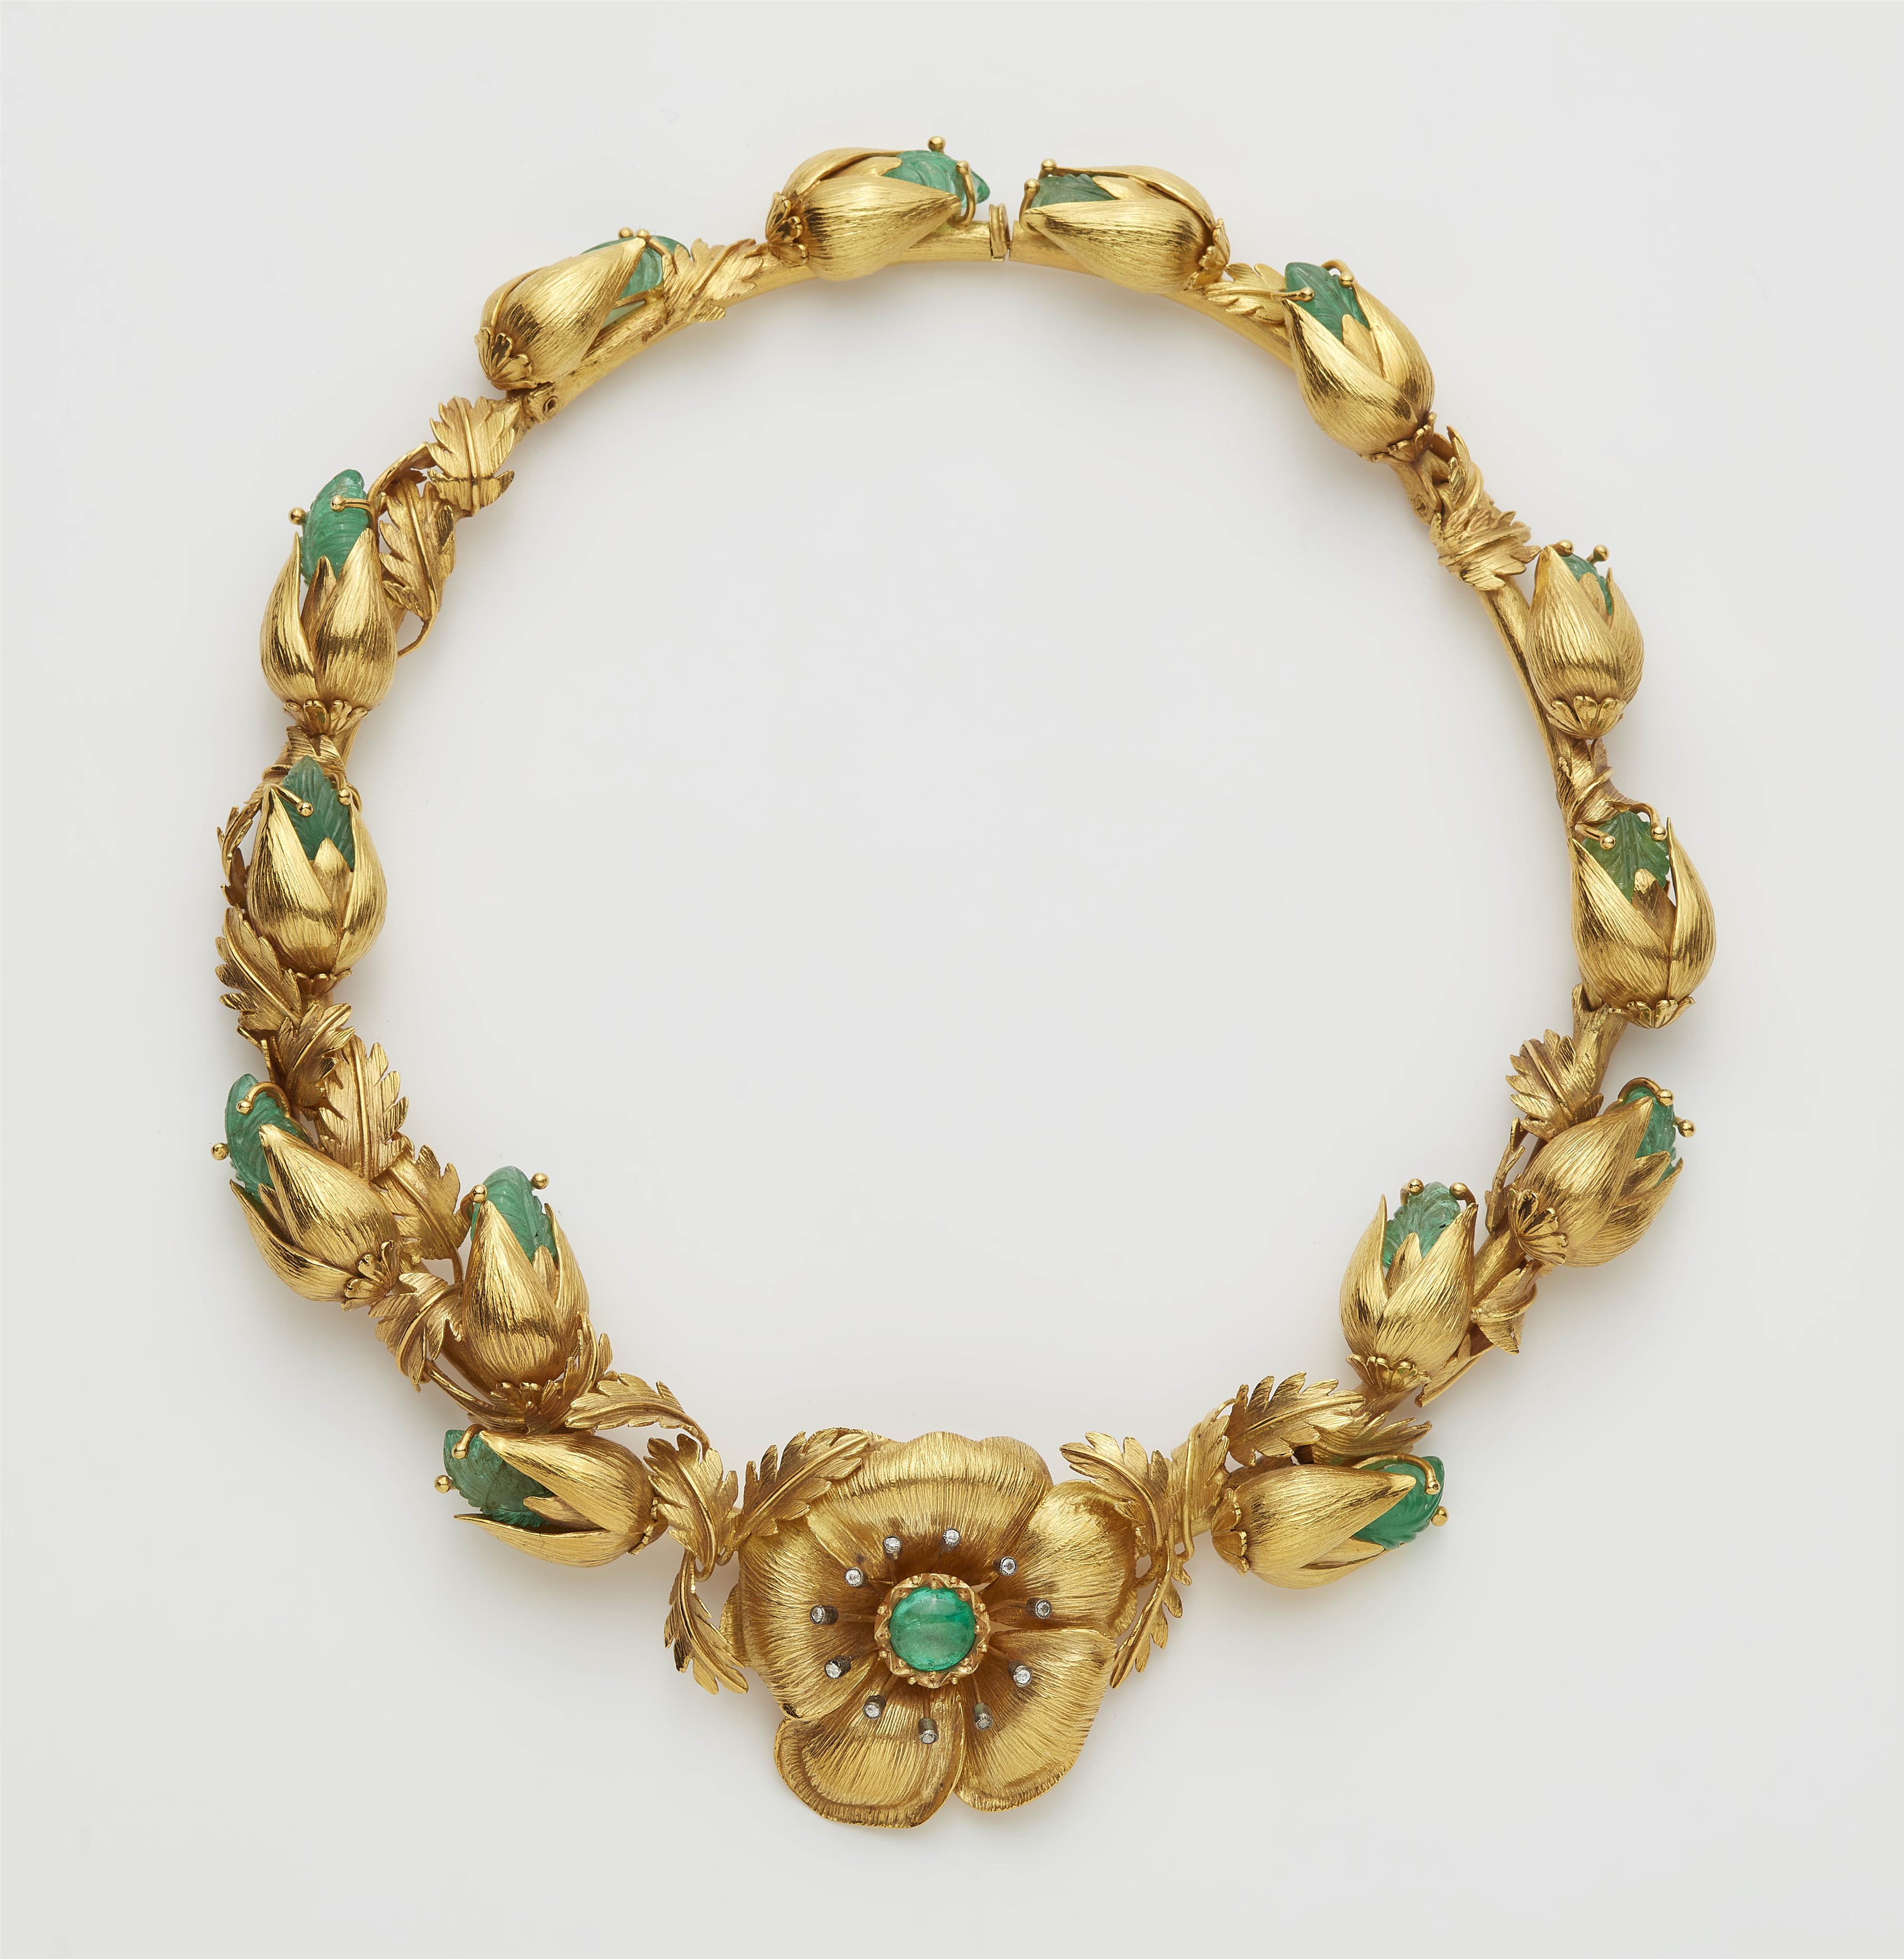 A possibly Greek one of a kind 20k gold and carved emerald necklace designed as a naturalistic wreath of dog roses. - image-1